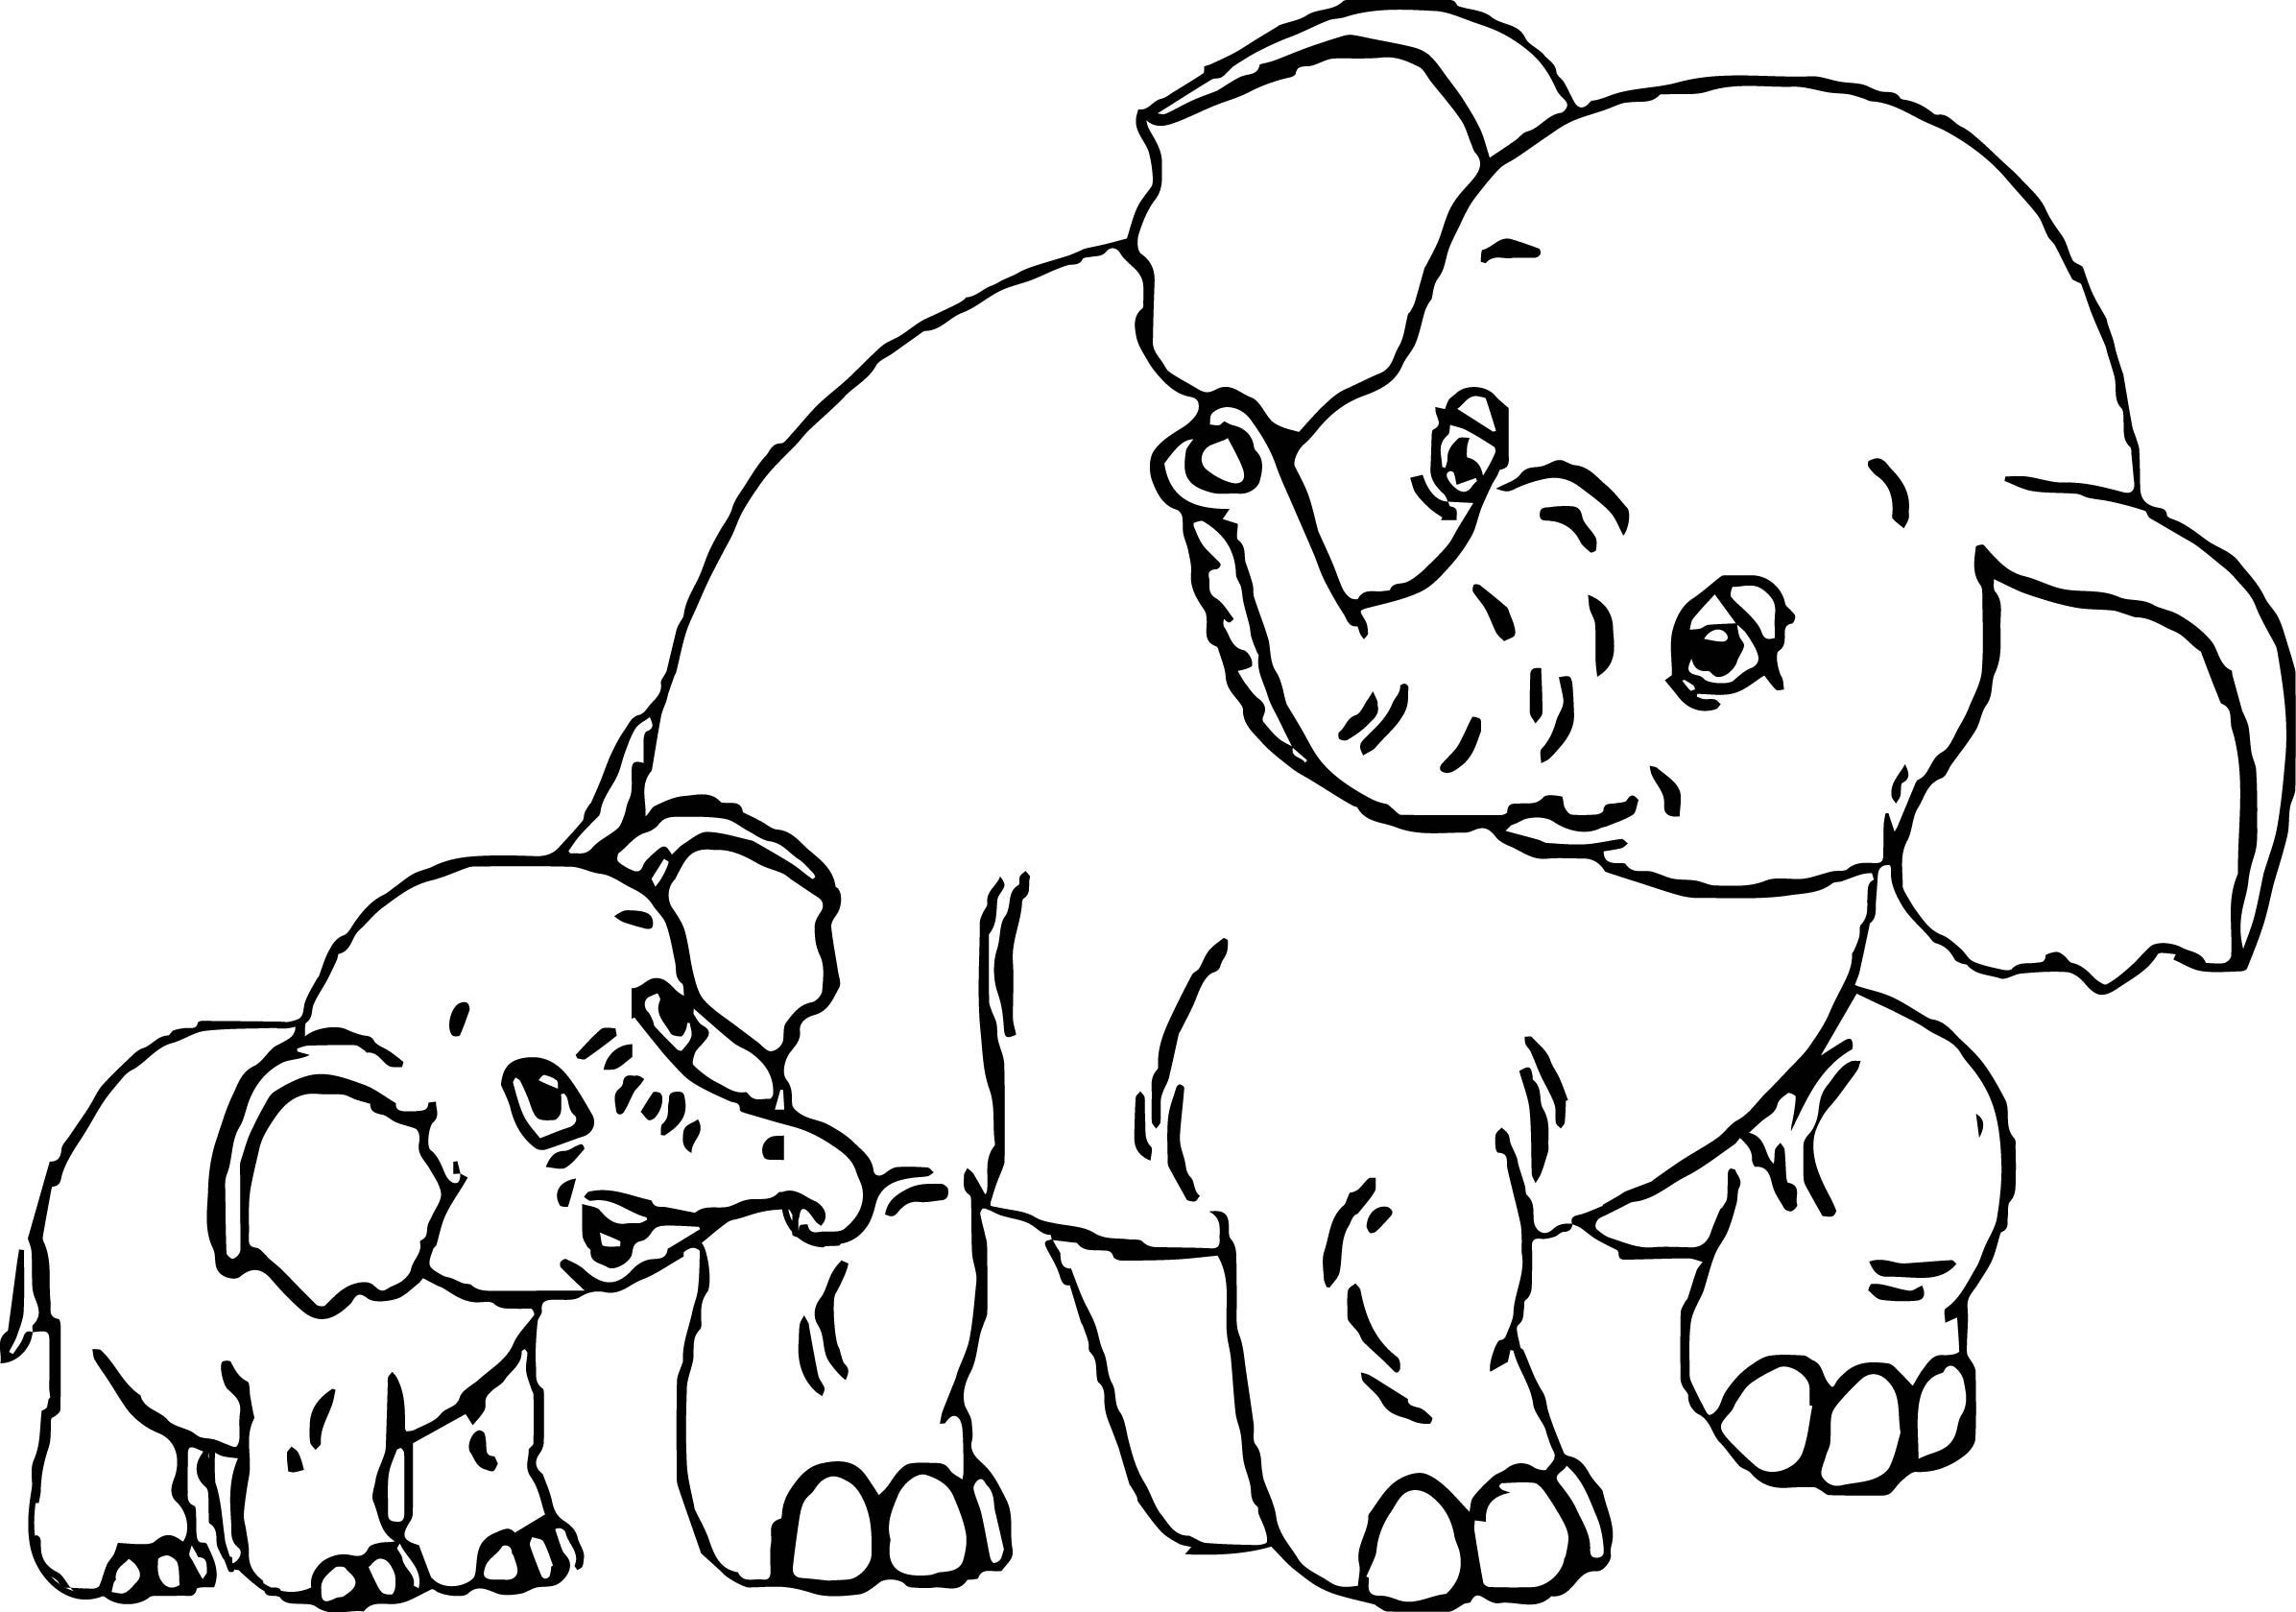 Elephant Coloring Pages - Coloring Home